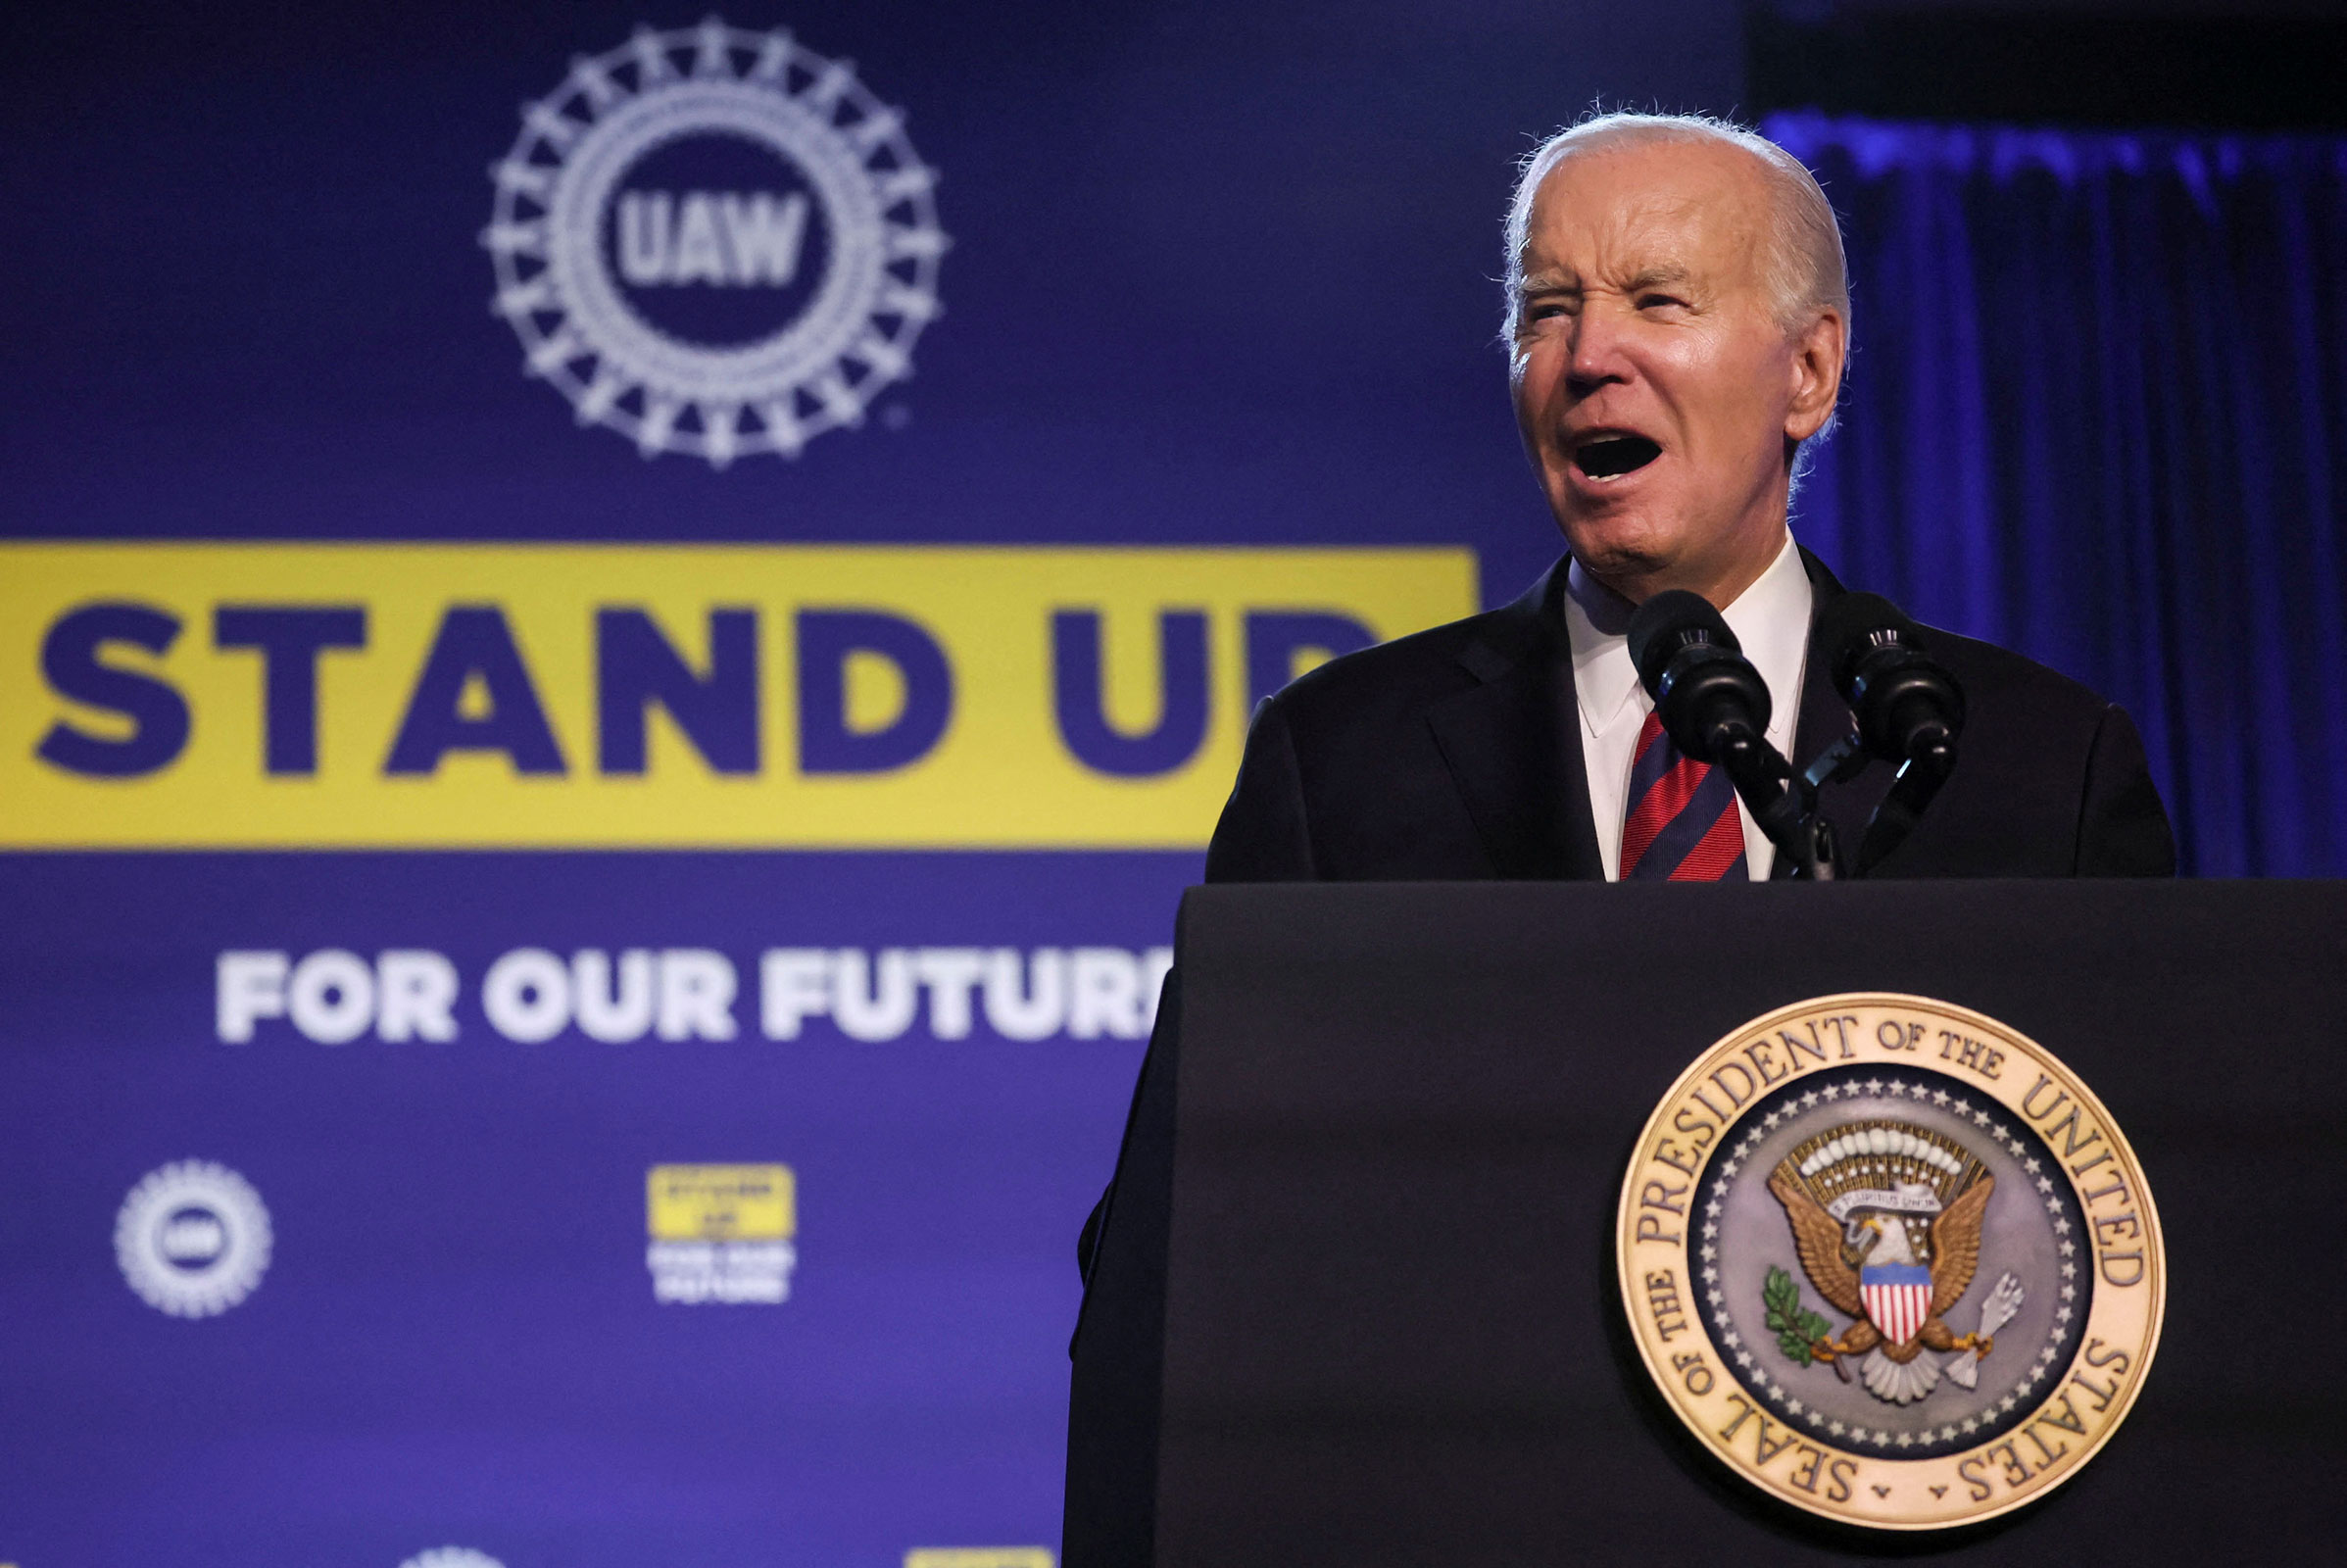 Biden speaks to United Auto Workers members at the UAW's Community Action Program legislative conference in Washington, DC, on Wednesday.